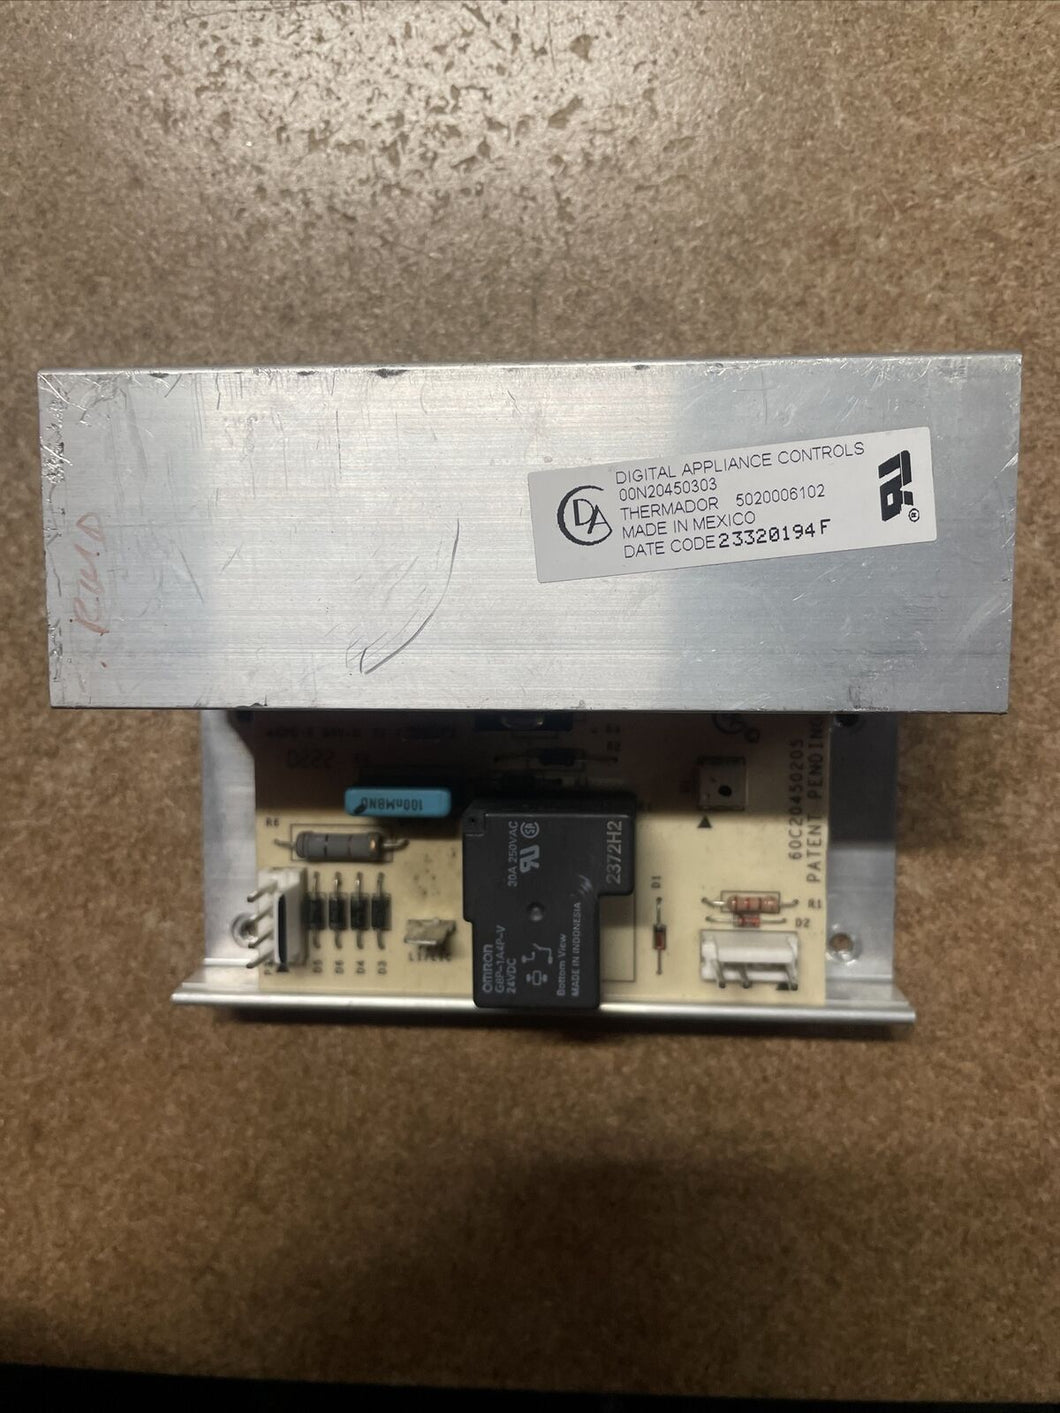 Thermador Control Board - Part # 5020006102 00N20450303 |KM1507